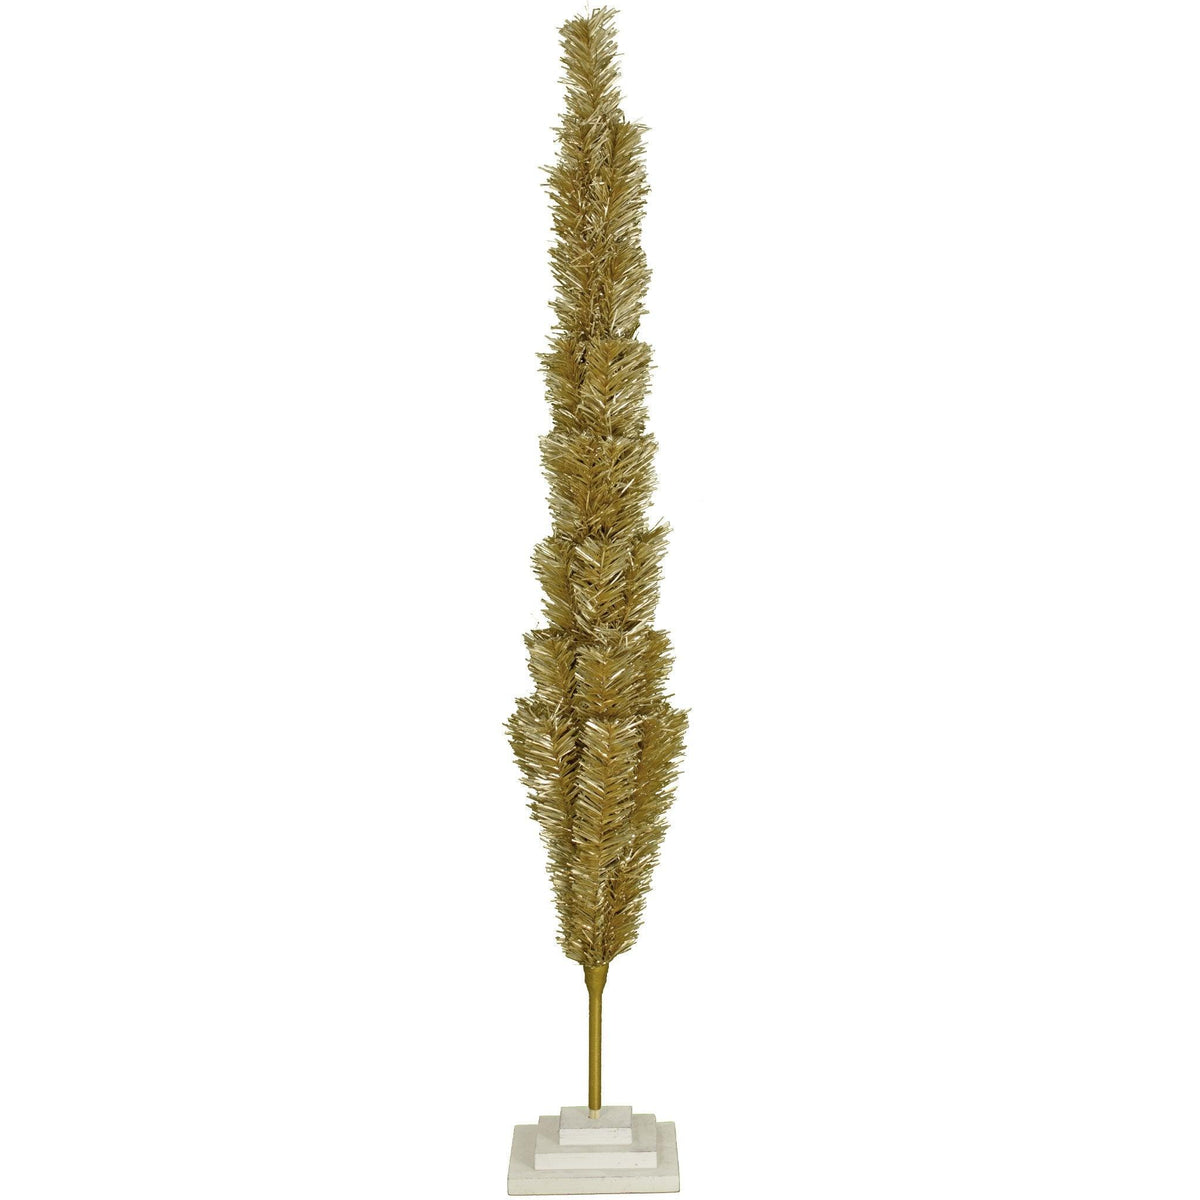 Our 48in Tall Antique Gold Christmas Tree has folding branches to shape how you like and safely store in your closet. 